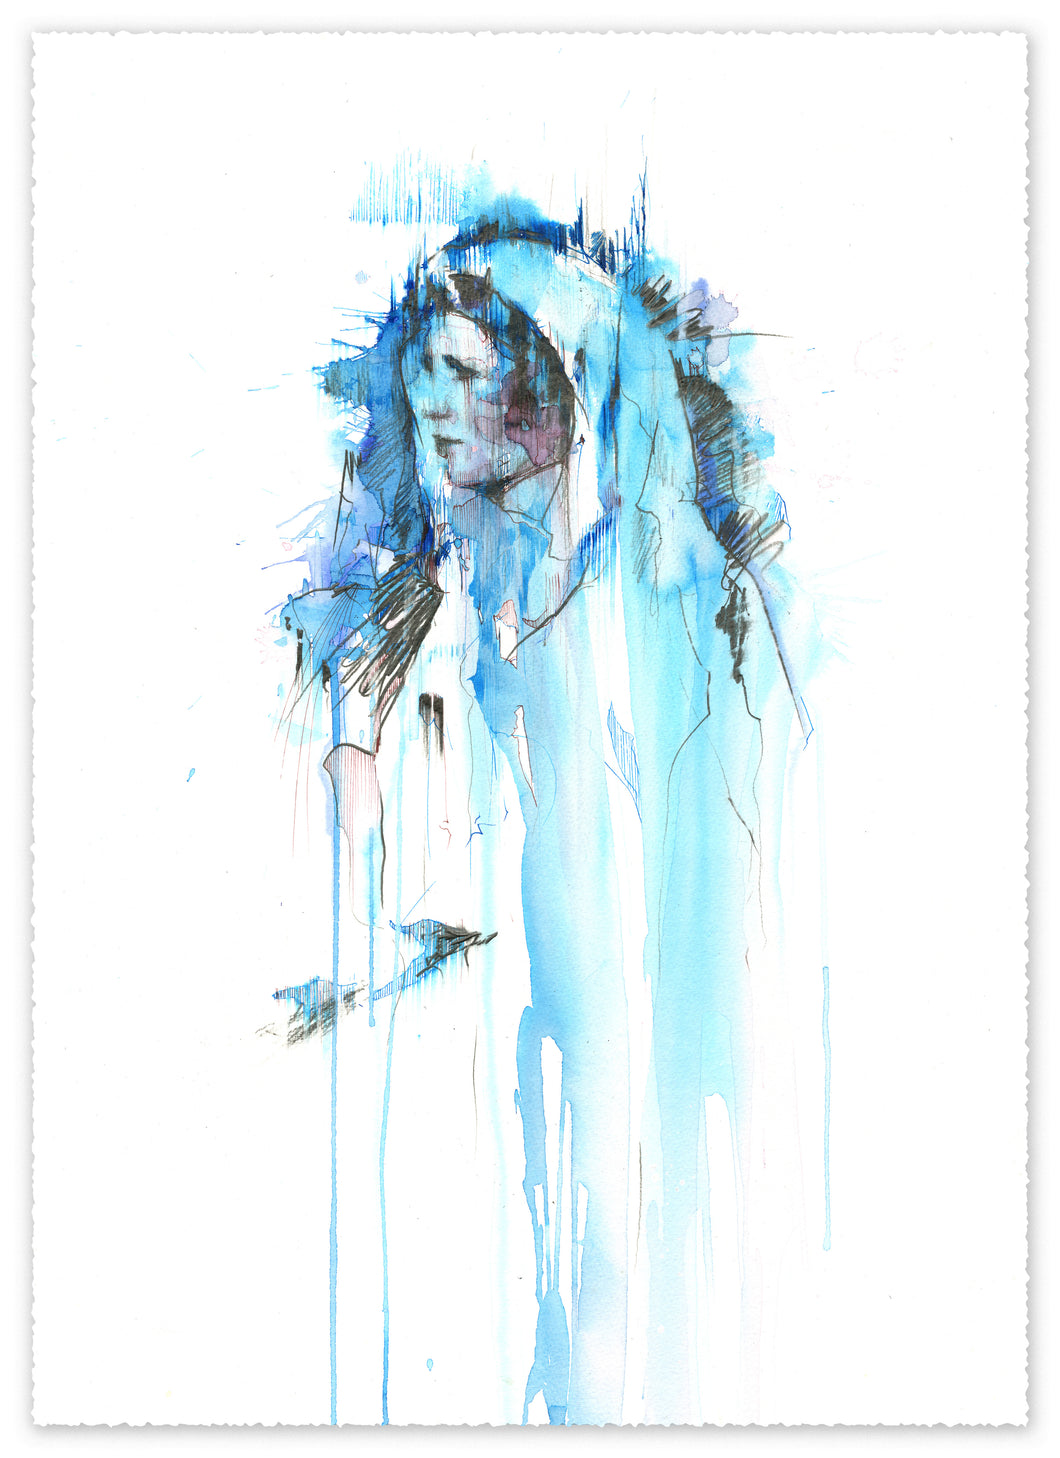 My Only Hope - Carne Griffiths